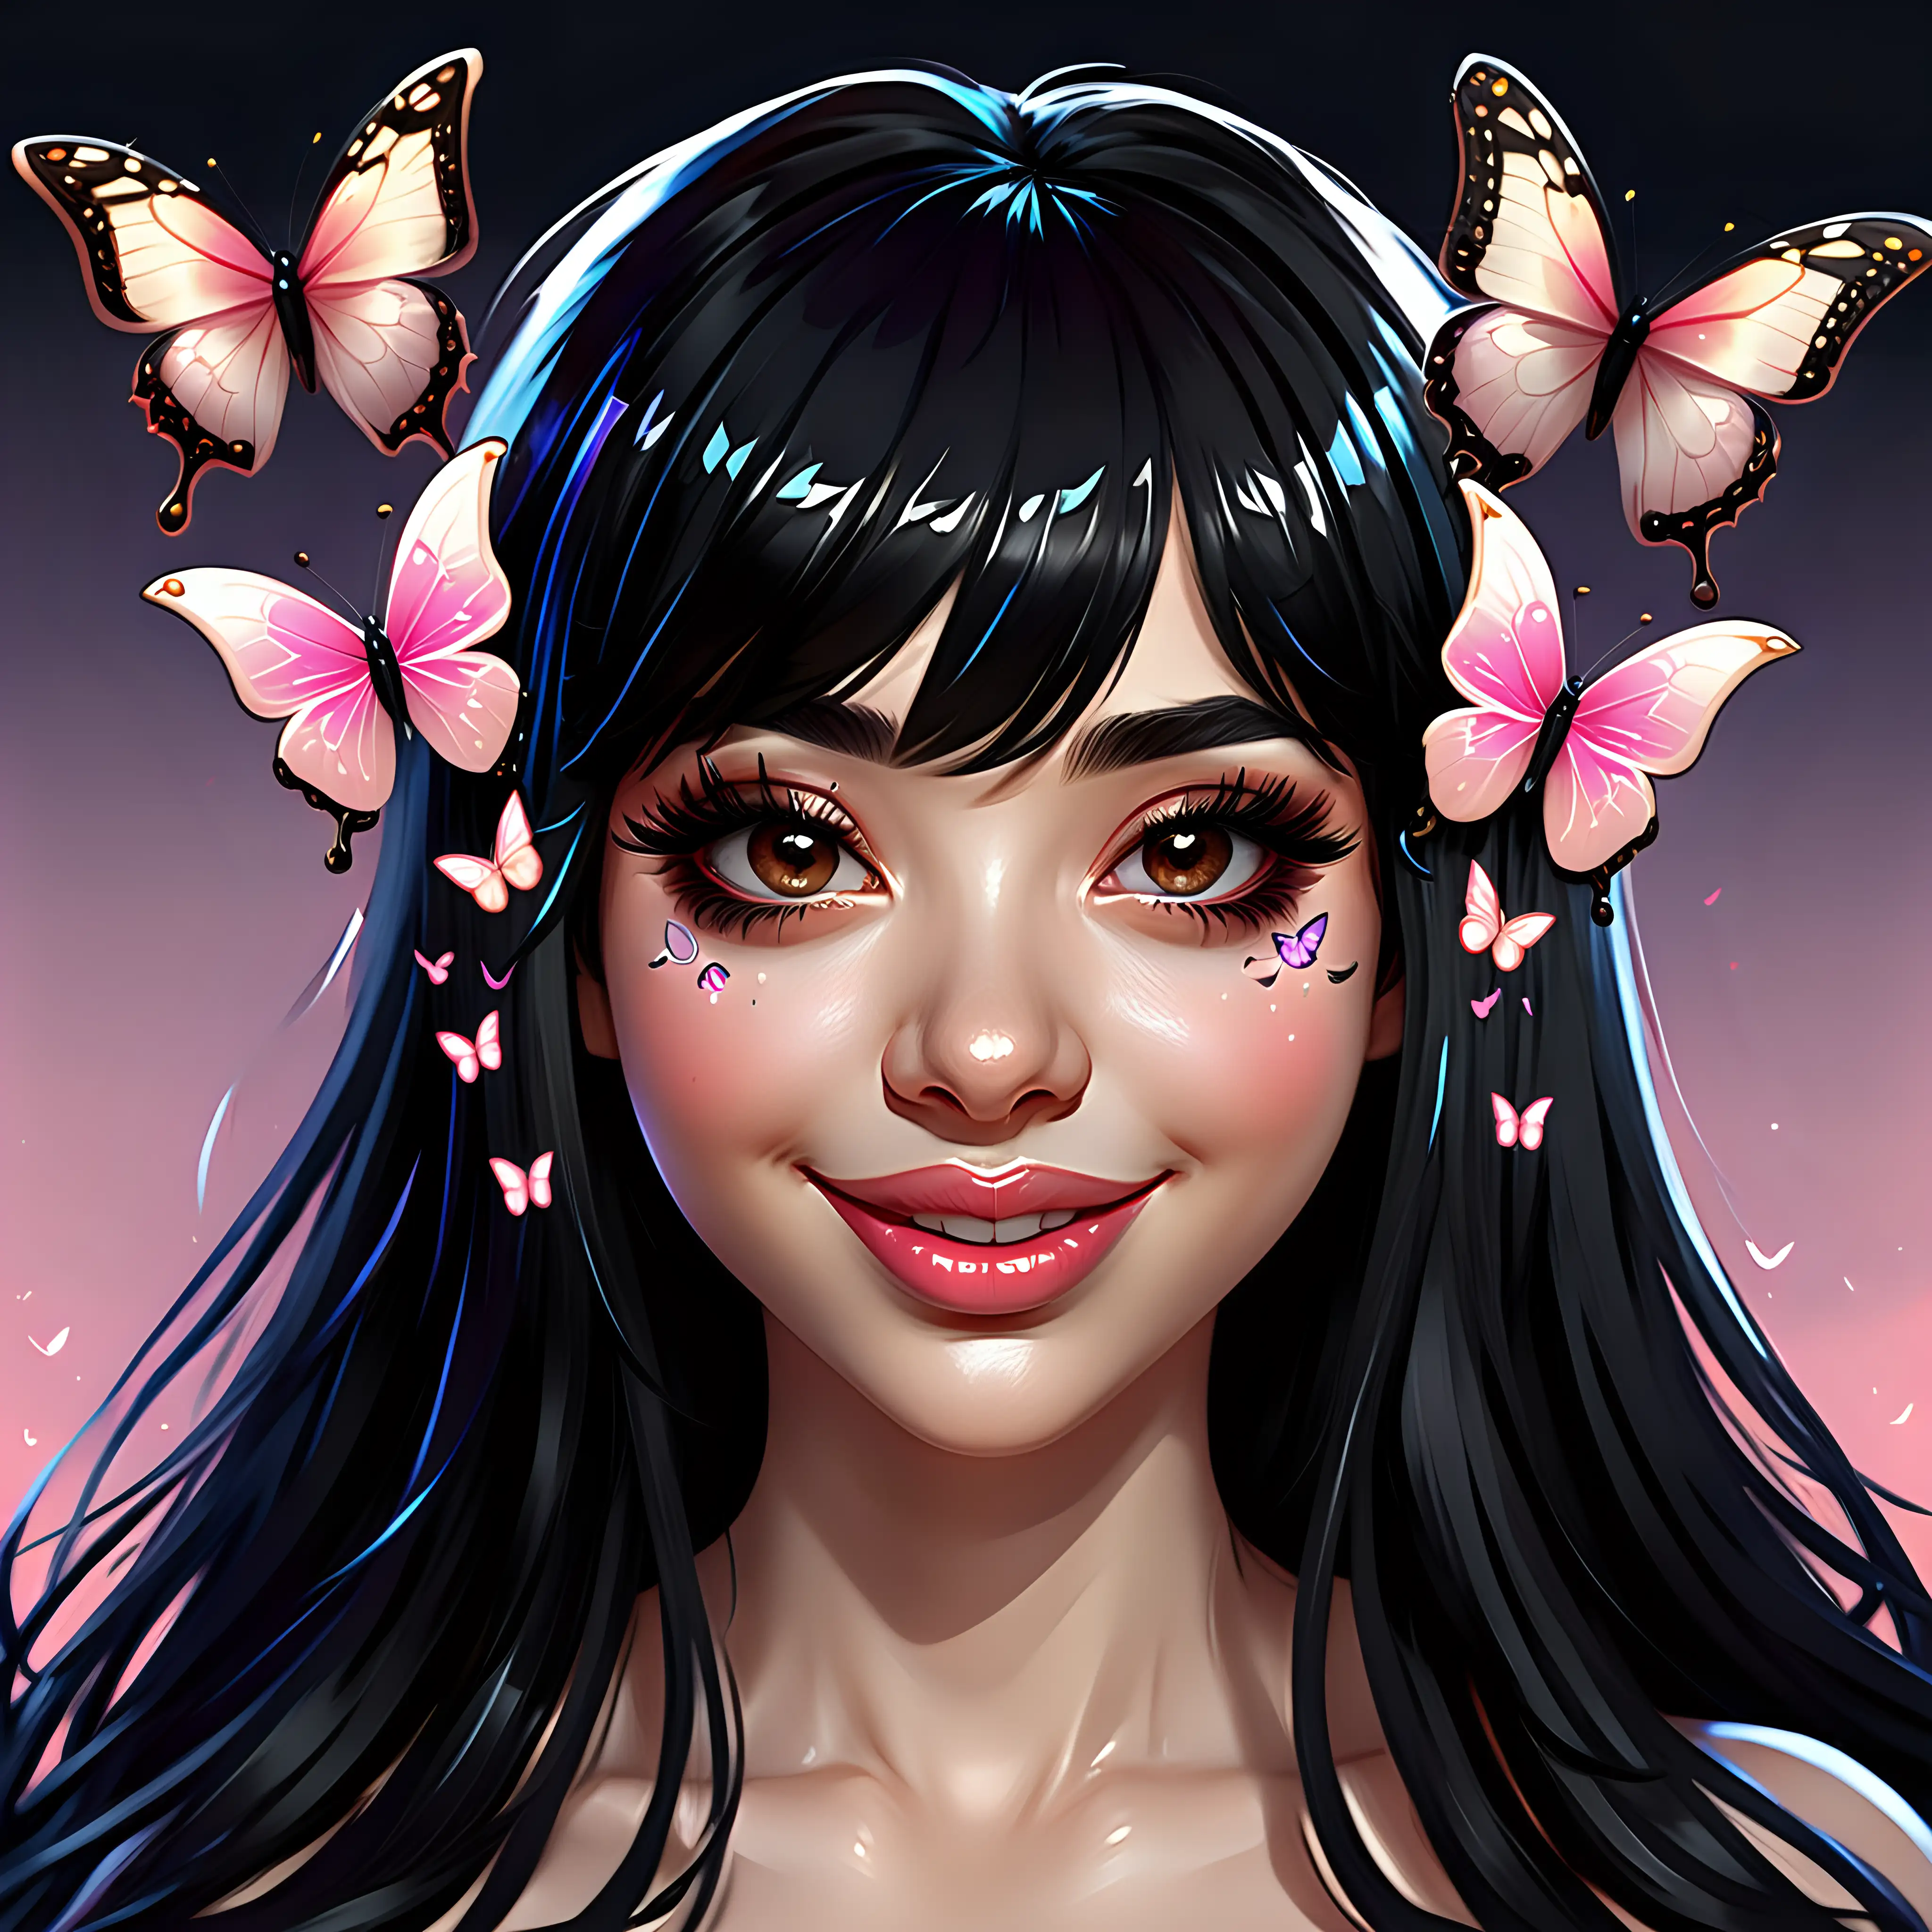 Elegant Twitch Emote Smiling Woman with Black Hair and Butterflies